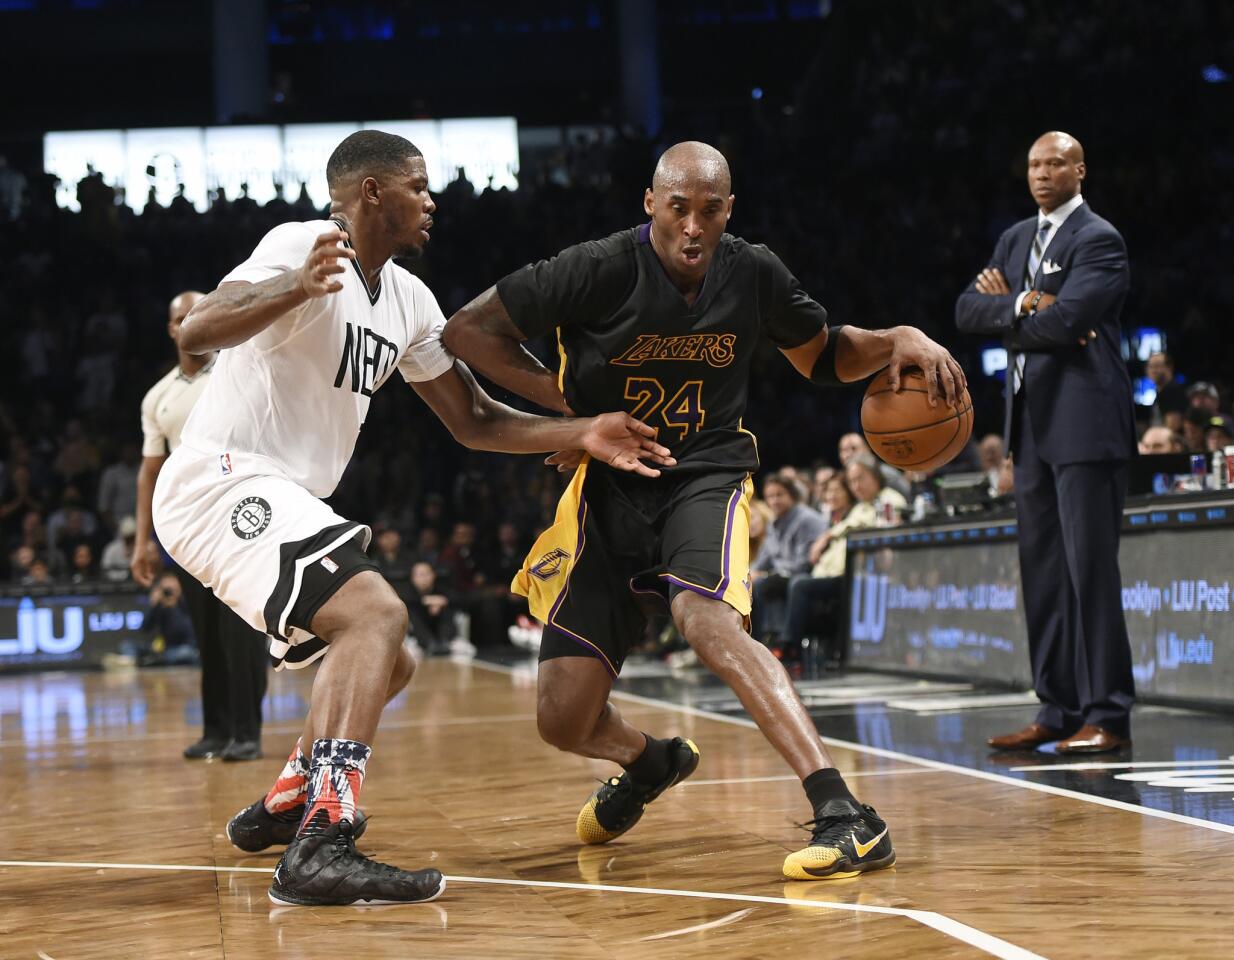 Preview: Kobe Bryant to sit out vs. Brooklyn Nets to rest shoulder